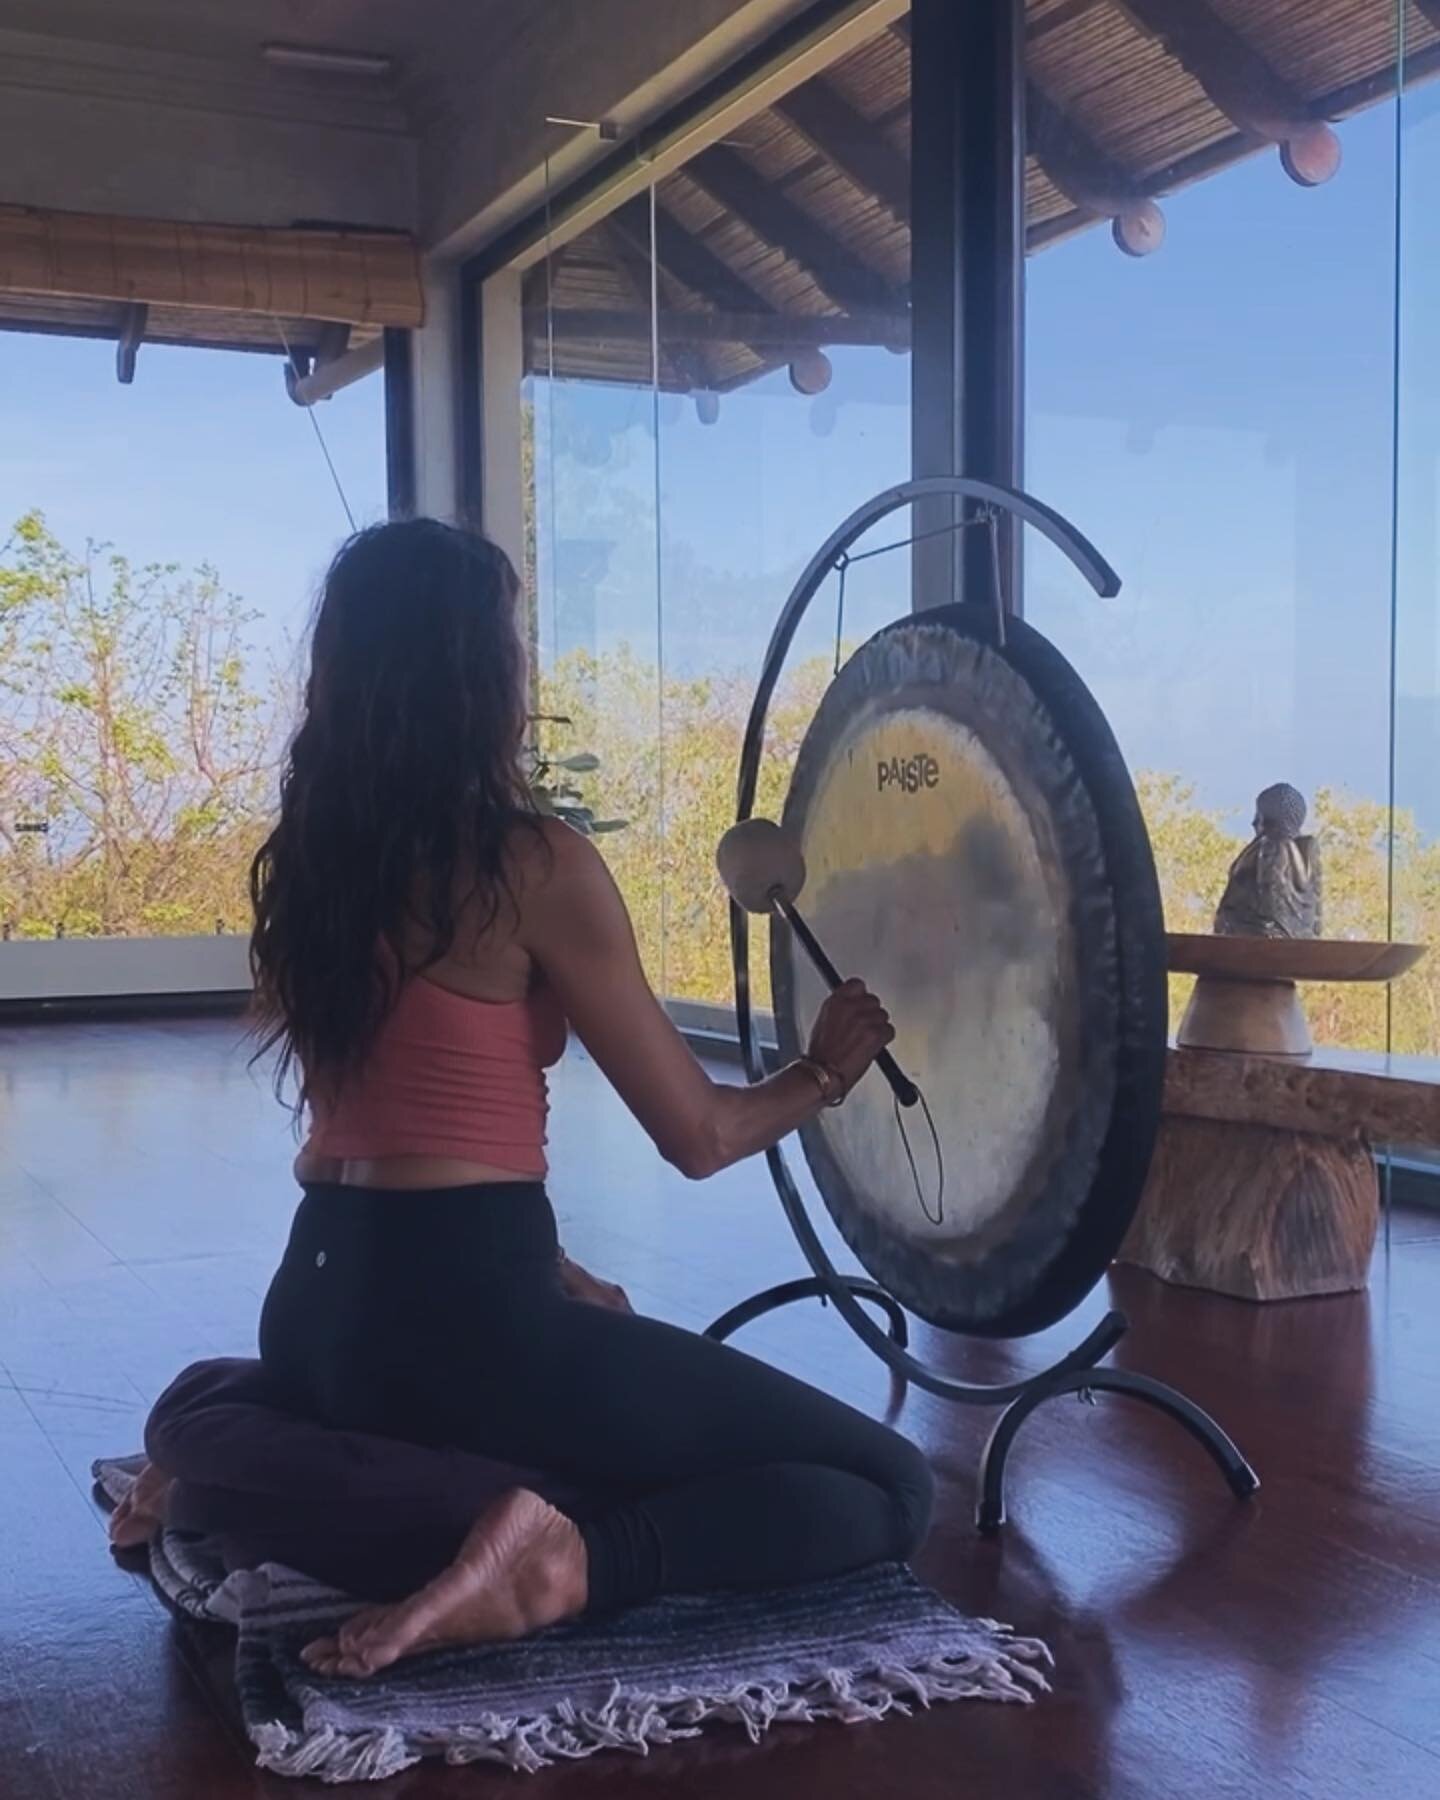 💫Join me in the Breathing Barn Sunday,  Nov 19th 6:00pm 
for an evening of 
Yoga Nidra and Sound Healing 

💫You will be guided through a detailed sleep meditation that will allow your mind and body to slip in a deep state of relaxation. 

💫 Receiv